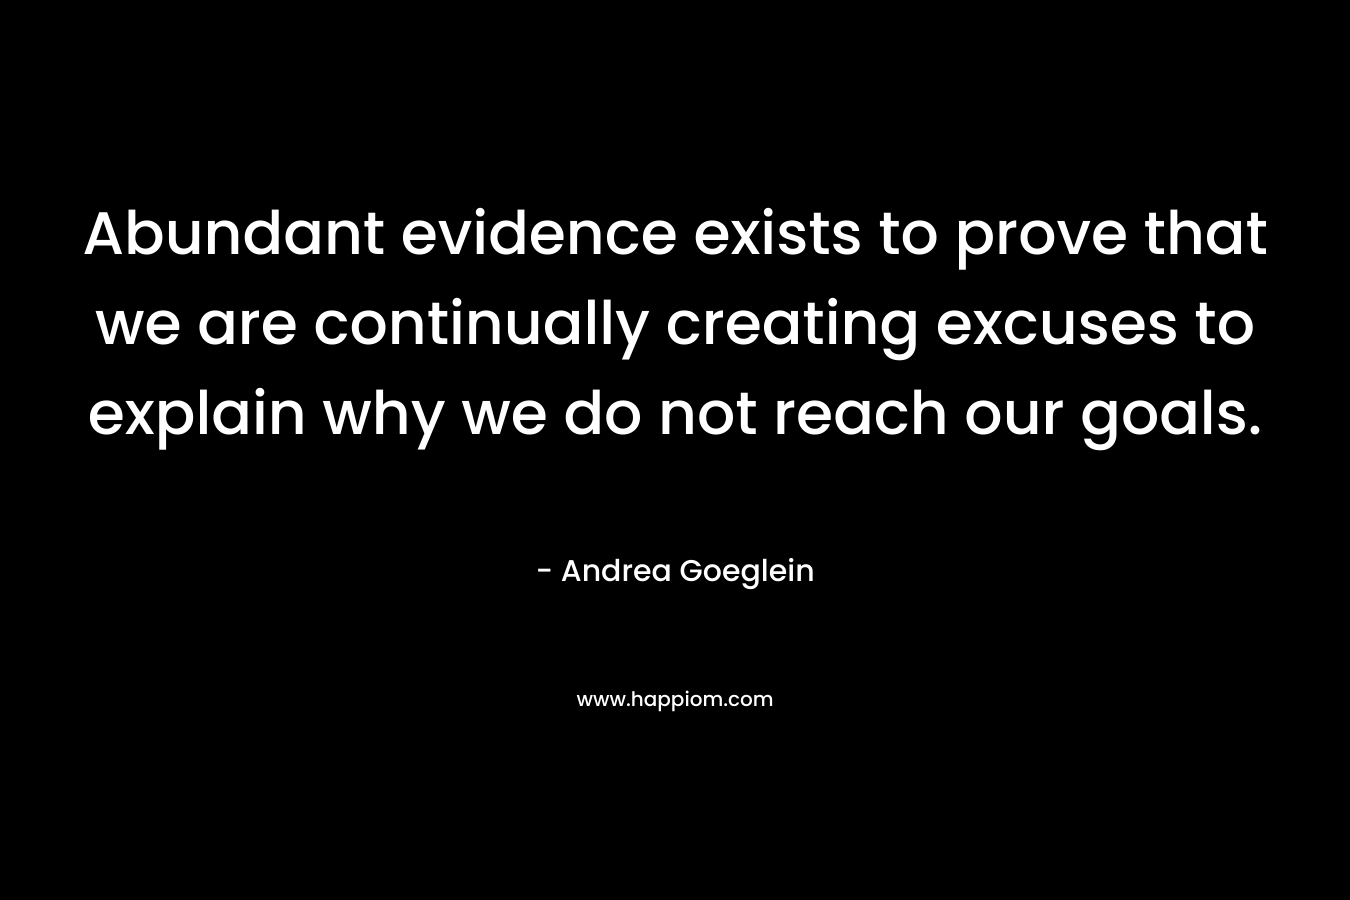 Abundant evidence exists to prove that we are continually creating excuses to explain why we do not reach our goals. – Andrea Goeglein